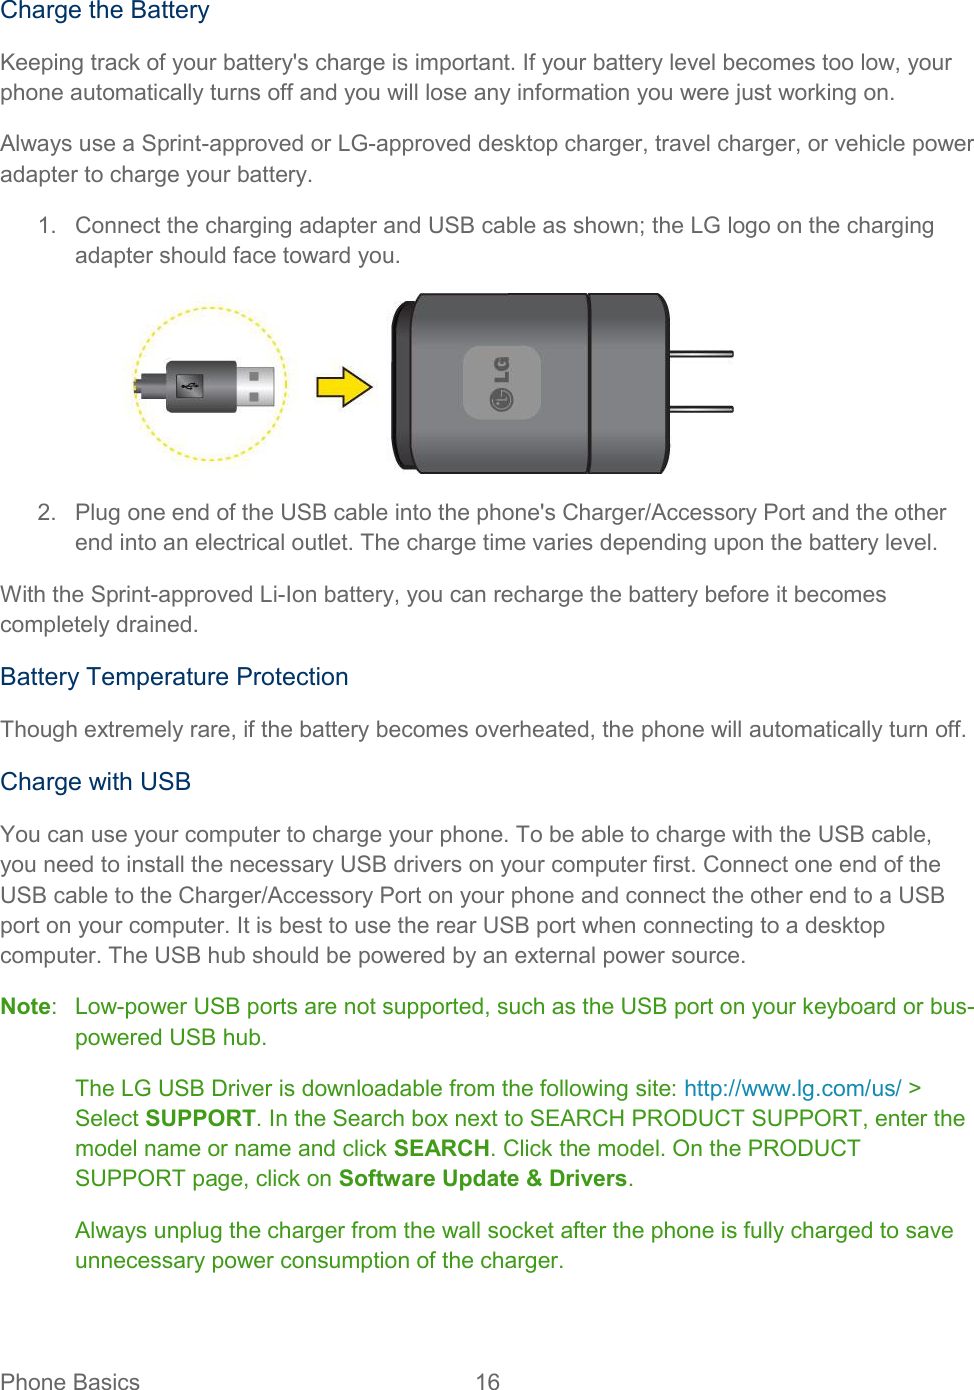  Phone Basics  16   Charge the Battery Keeping track of your battery&apos;s charge is important. If your battery level becomes too low, your phone automatically turns off and you will lose any information you were just working on. Always use a Sprint-approved or LG-approved desktop charger, travel charger, or vehicle power adapter to charge your battery. 1.  Connect the charging adapter and USB cable as shown; the LG logo on the charging adapter should face toward you.  2.  Plug one end of the USB cable into the phone&apos;s Charger/Accessory Port and the other end into an electrical outlet. The charge time varies depending upon the battery level. With the Sprint-approved Li-Ion battery, you can recharge the battery before it becomes completely drained. Battery Temperature Protection Though extremely rare, if the battery becomes overheated, the phone will automatically turn off. Charge with USB You can use your computer to charge your phone. To be able to charge with the USB cable, you need to install the necessary USB drivers on your computer first. Connect one end of the USB cable to the Charger/Accessory Port on your phone and connect the other end to a USB port on your computer. It is best to use the rear USB port when connecting to a desktop computer. The USB hub should be powered by an external power source. Note:  Low-power USB ports are not supported, such as the USB port on your keyboard or bus-powered USB hub. The LG USB Driver is downloadable from the following site: http://www.lg.com/us/ &gt; Select SUPPORT. In the Search box next to SEARCH PRODUCT SUPPORT, enter the model name or name and click SEARCH. Click the model. On the PRODUCT SUPPORT page, click on Software Update &amp; Drivers. Always unplug the charger from the wall socket after the phone is fully charged to save unnecessary power consumption of the charger. 